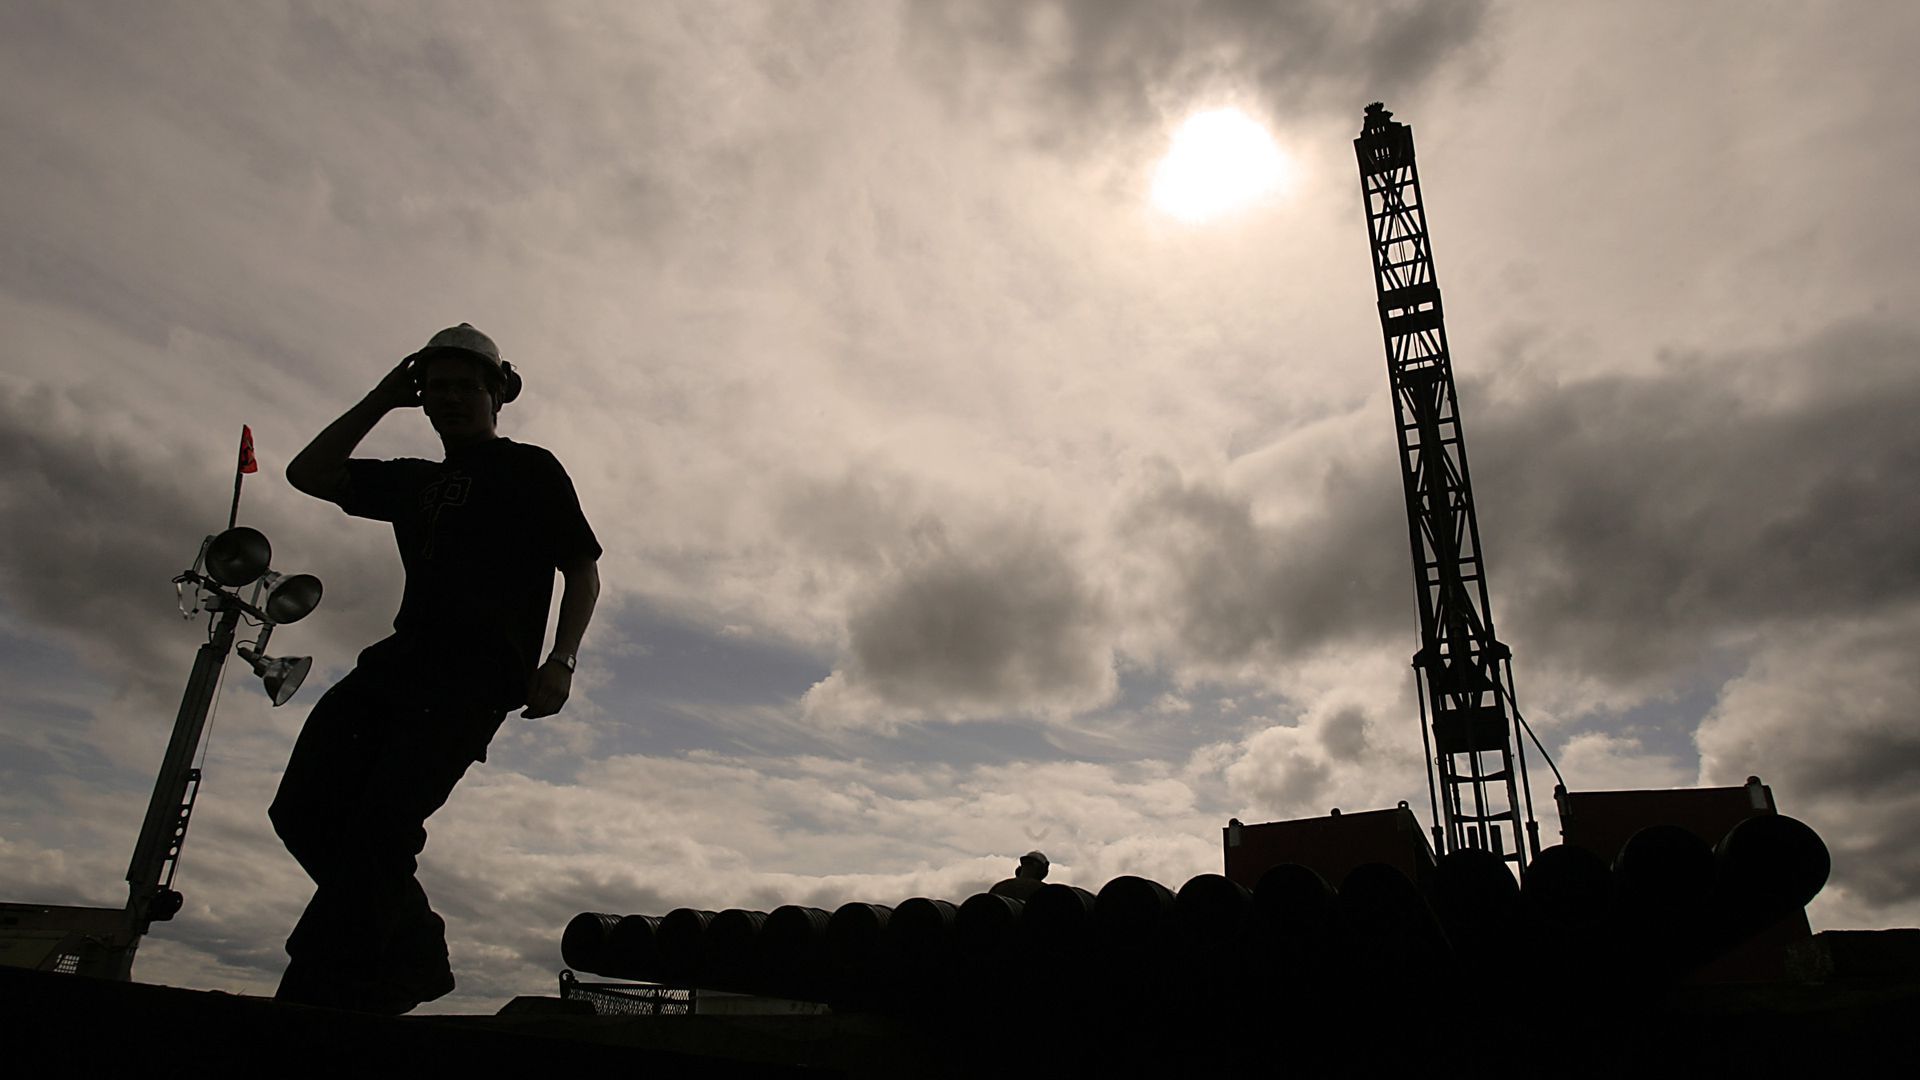 An employee of Northen Dynasty Mines Inc. mans a drilling rig in the Pebble Mine East site near the village of Iliamna, Alaska